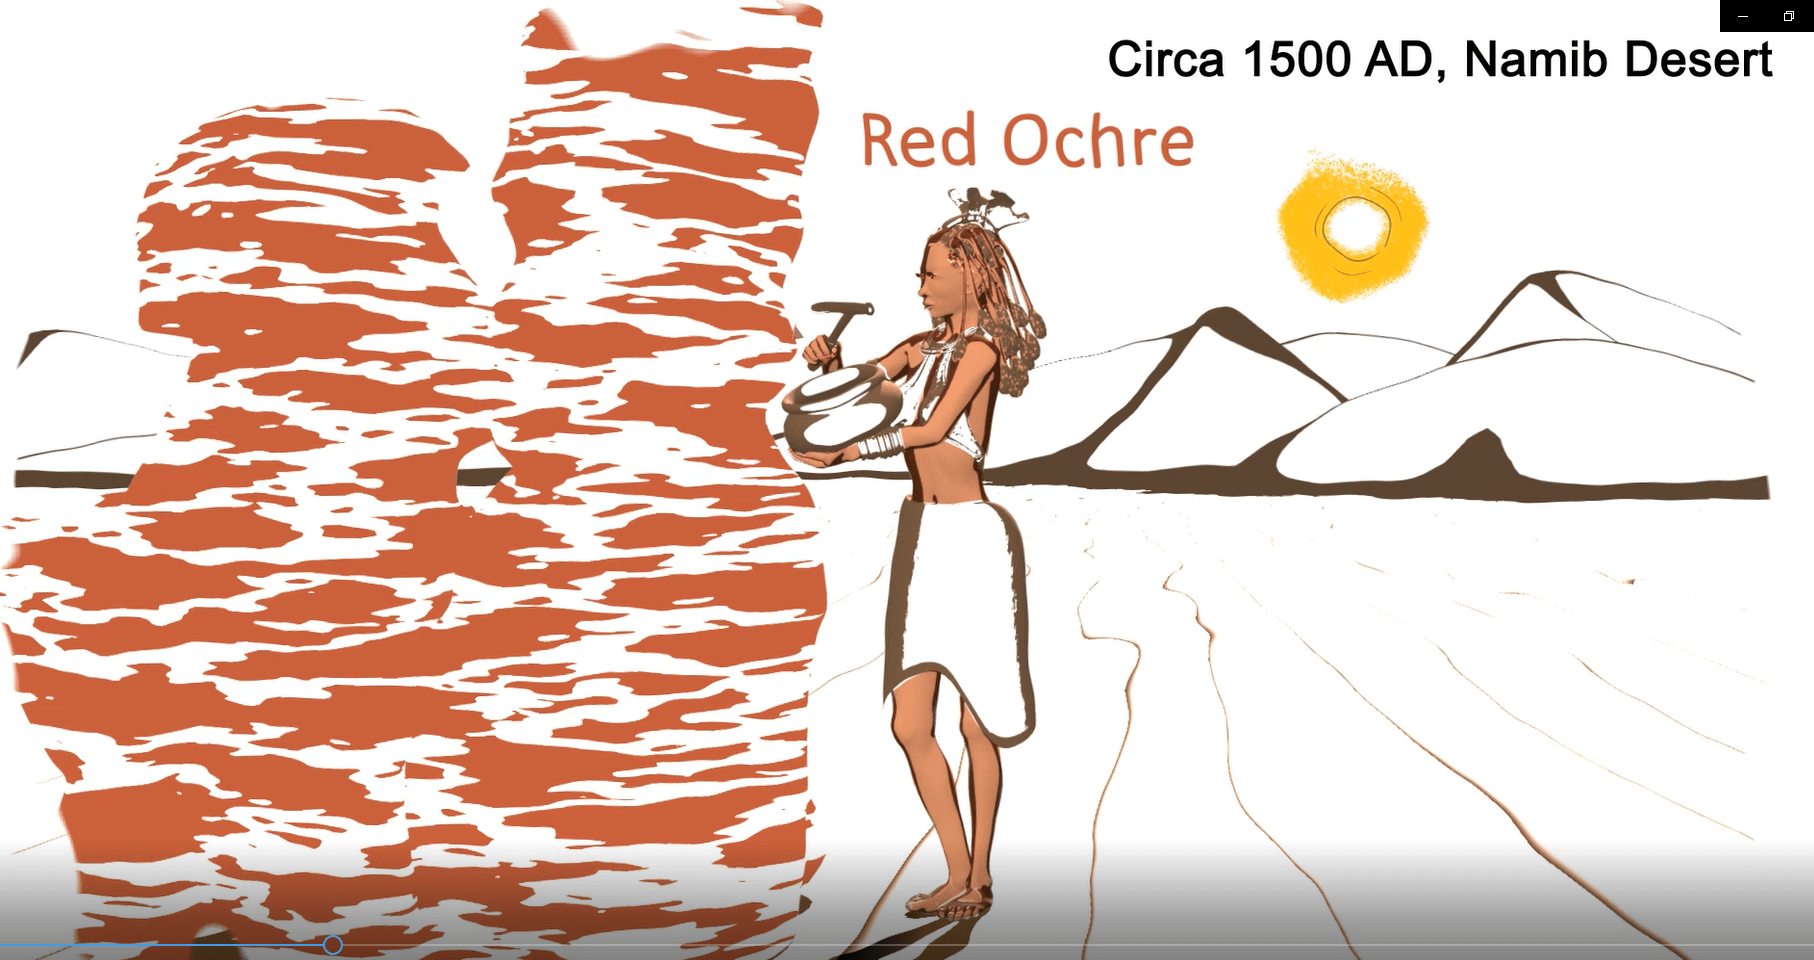 How the Himba Used the Sun Protective Power of the Red Ochre to Survive the Harsh Namib Sun